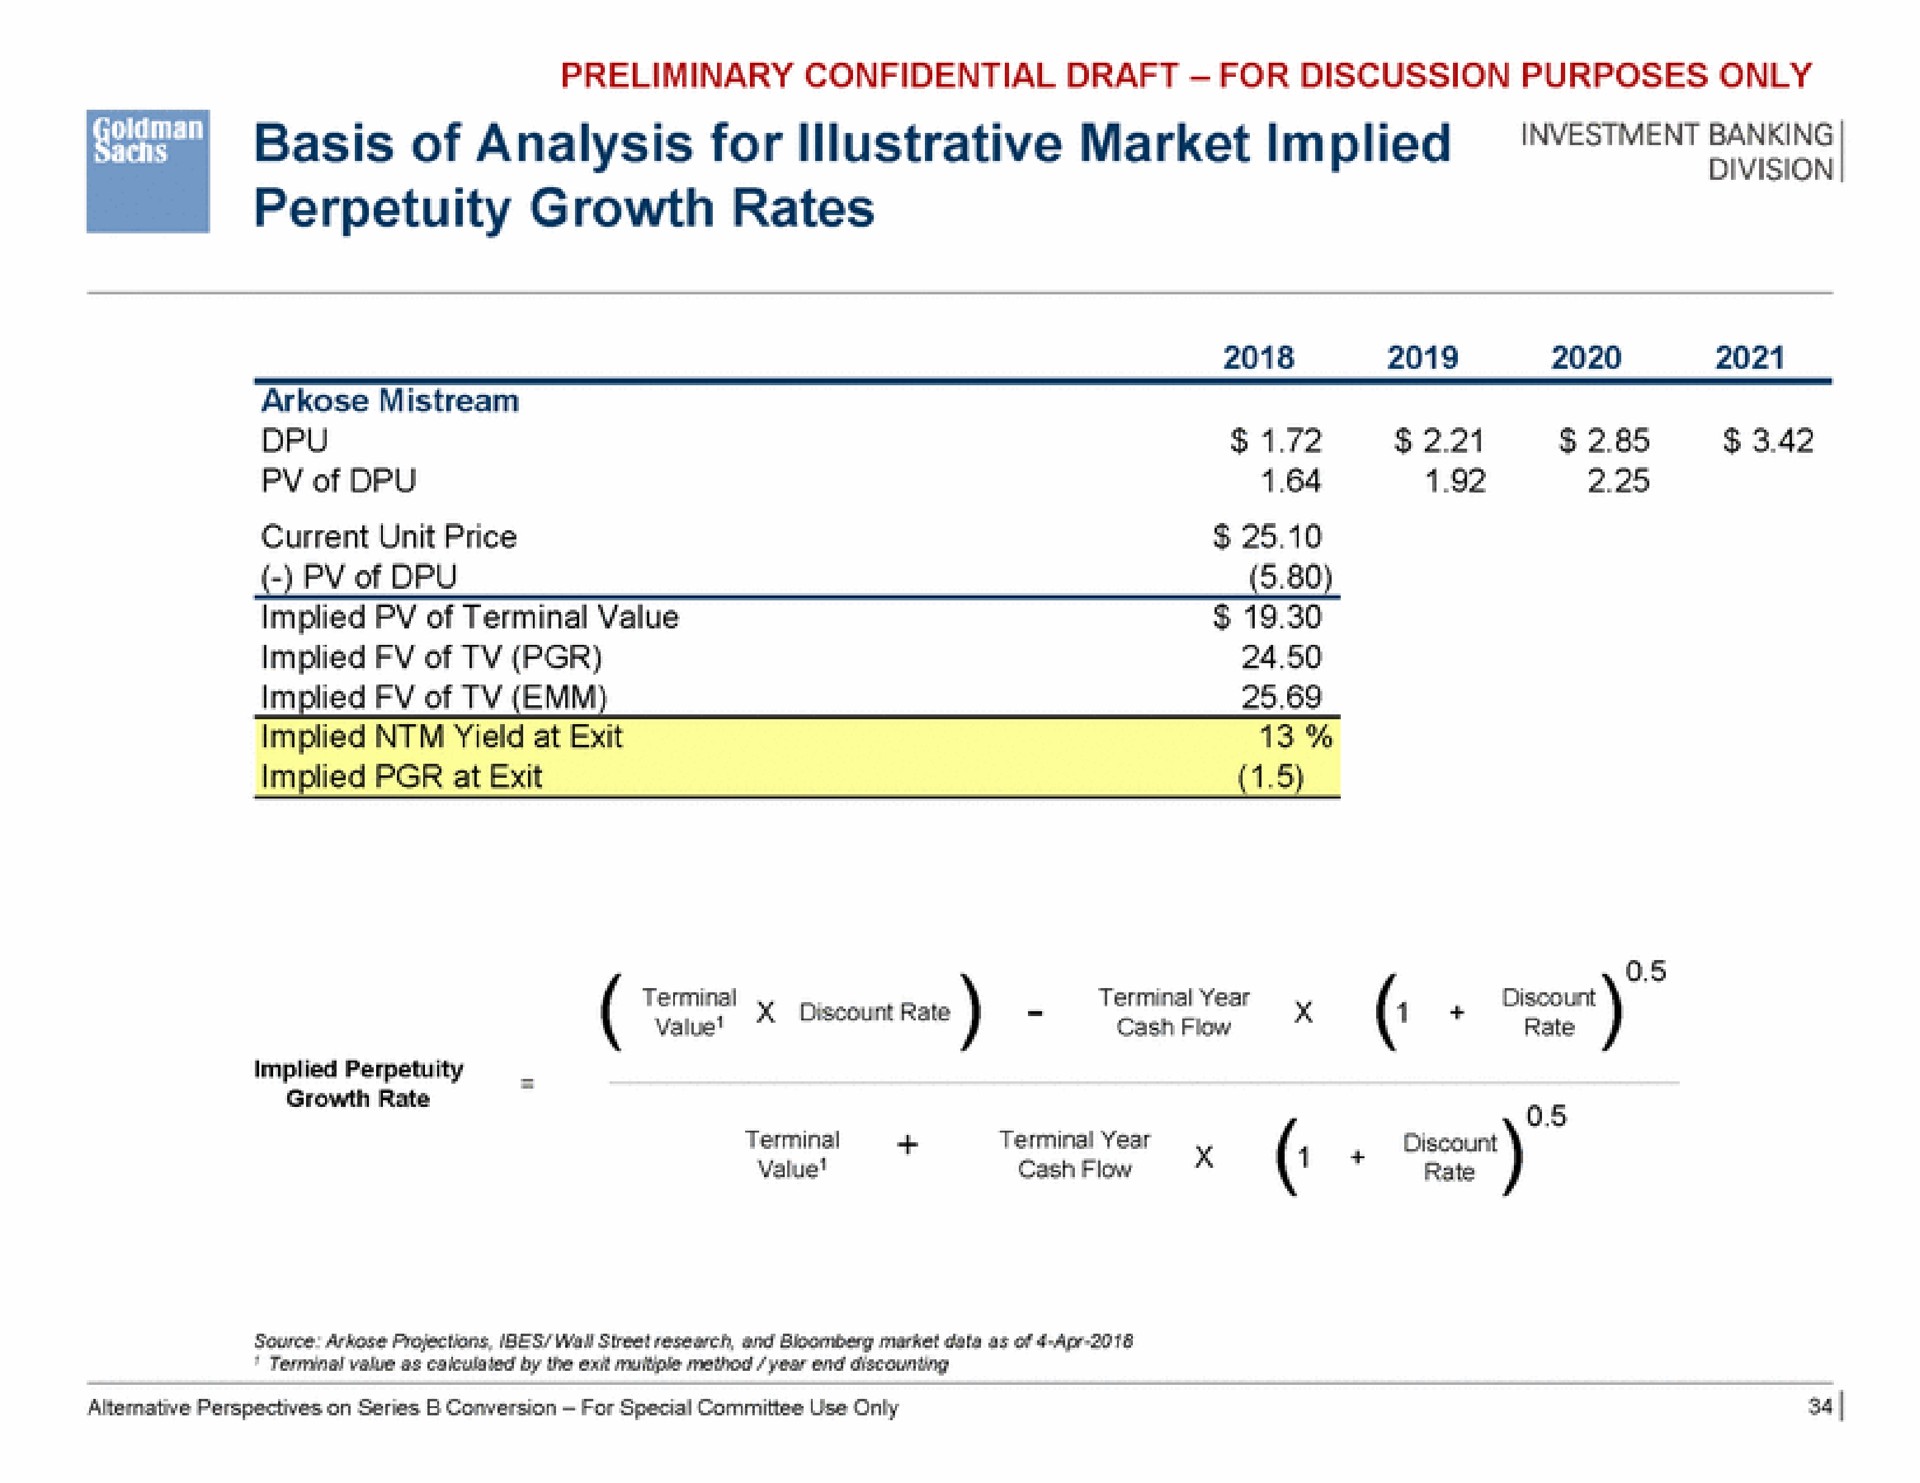 basis of analysis for illustrative market implied banking perpetuity growth rates | Goldman Sachs